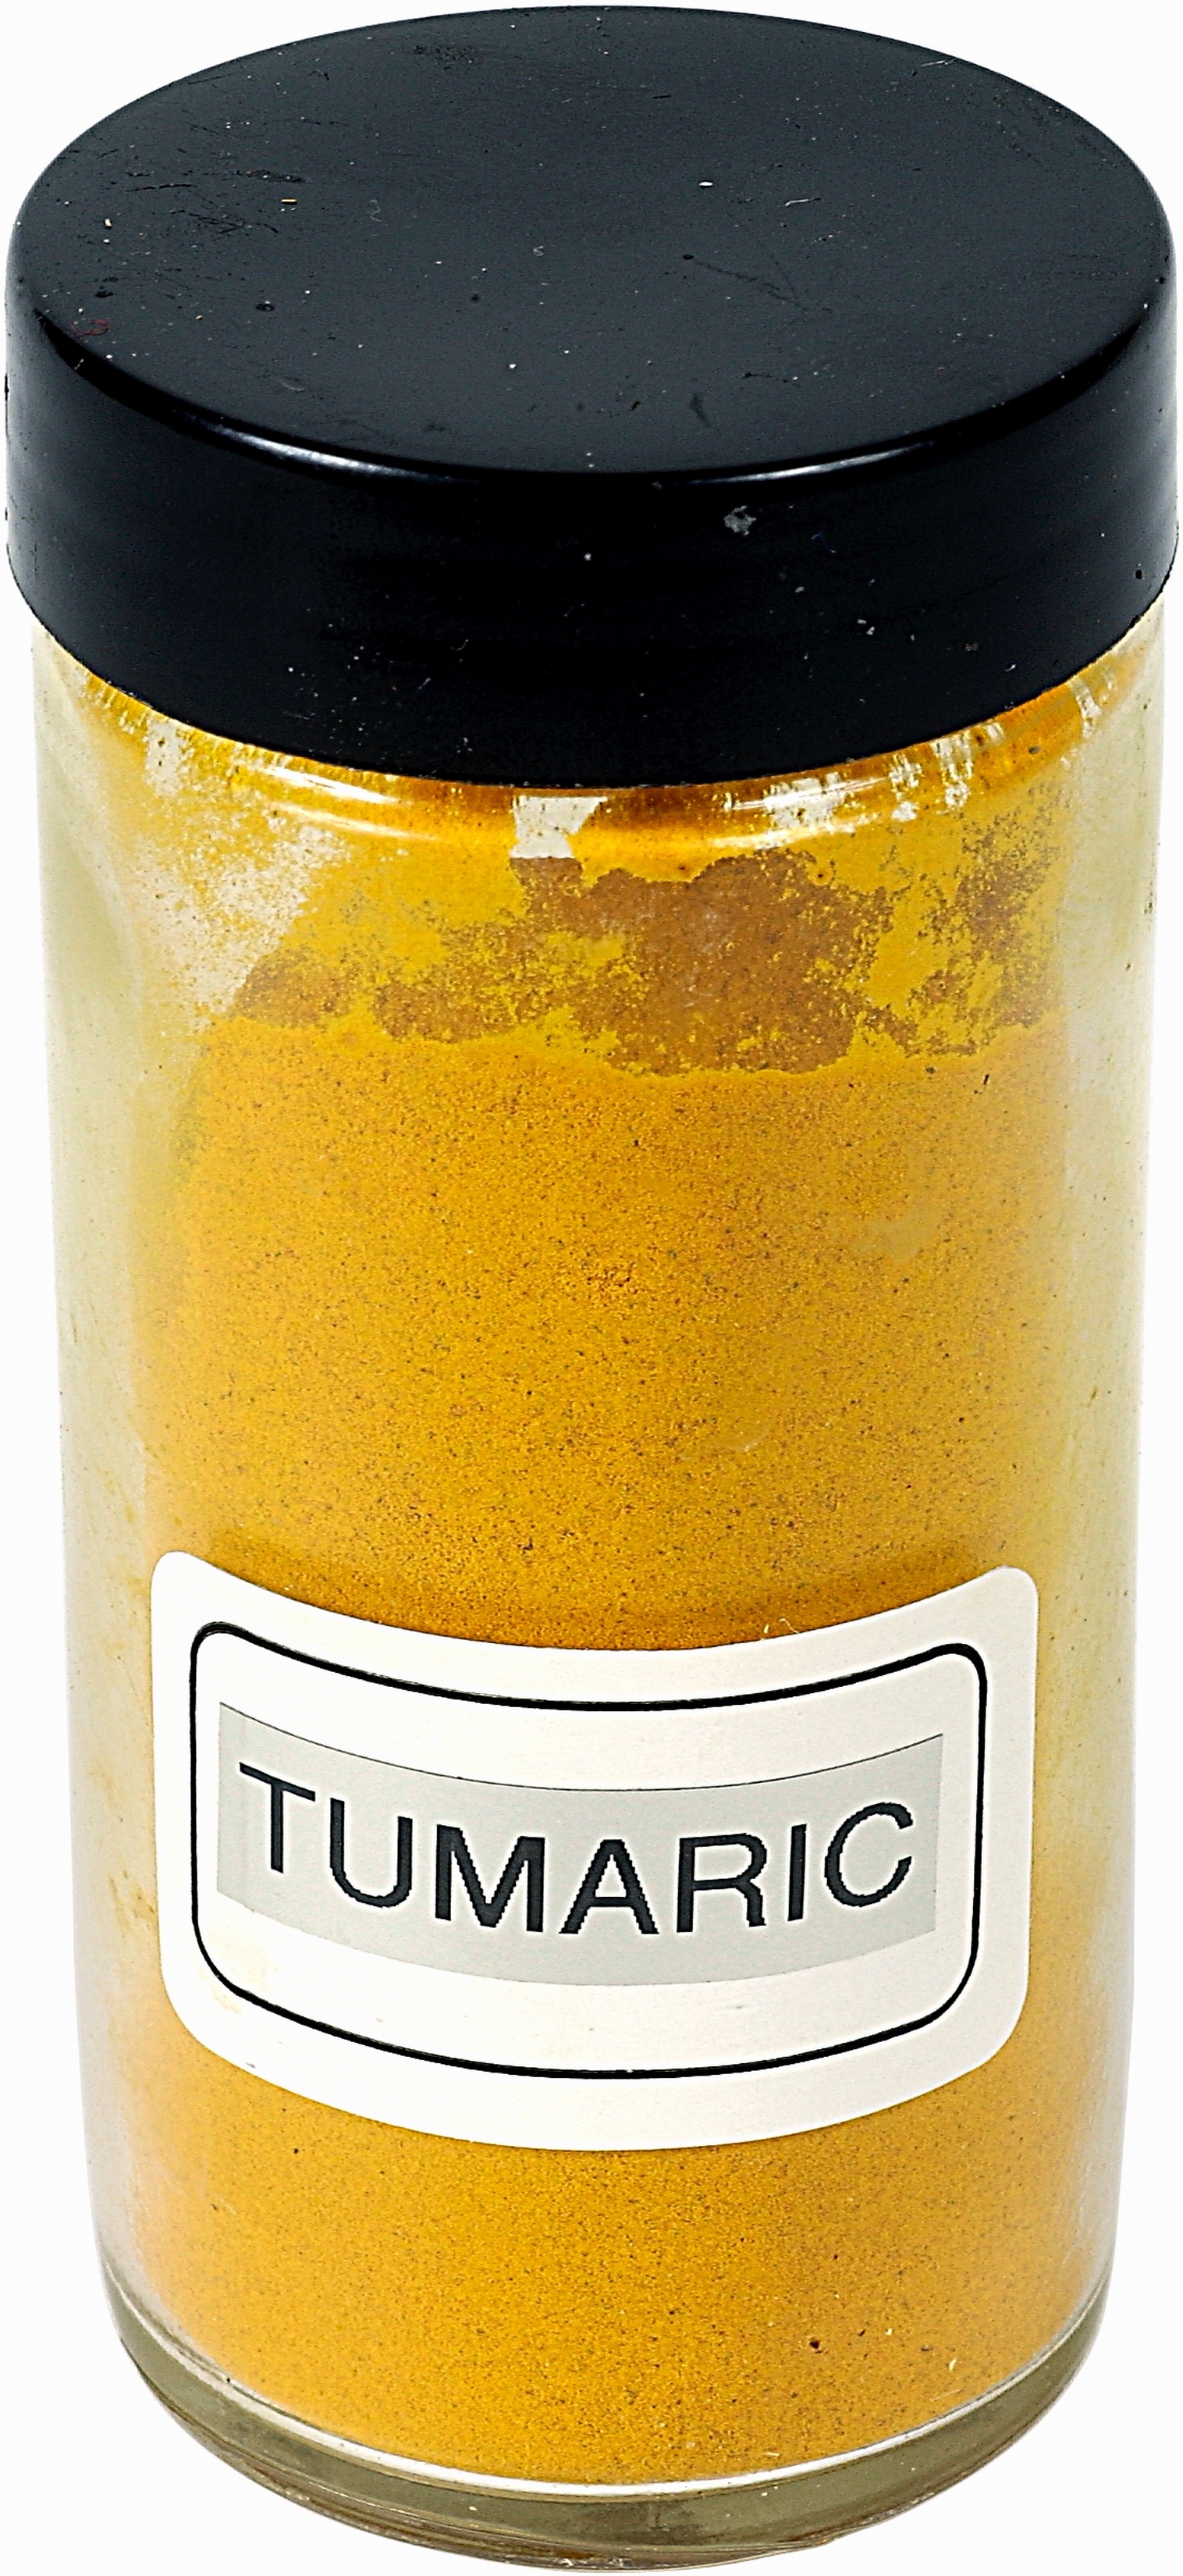 How to Remove Turmeric Stains